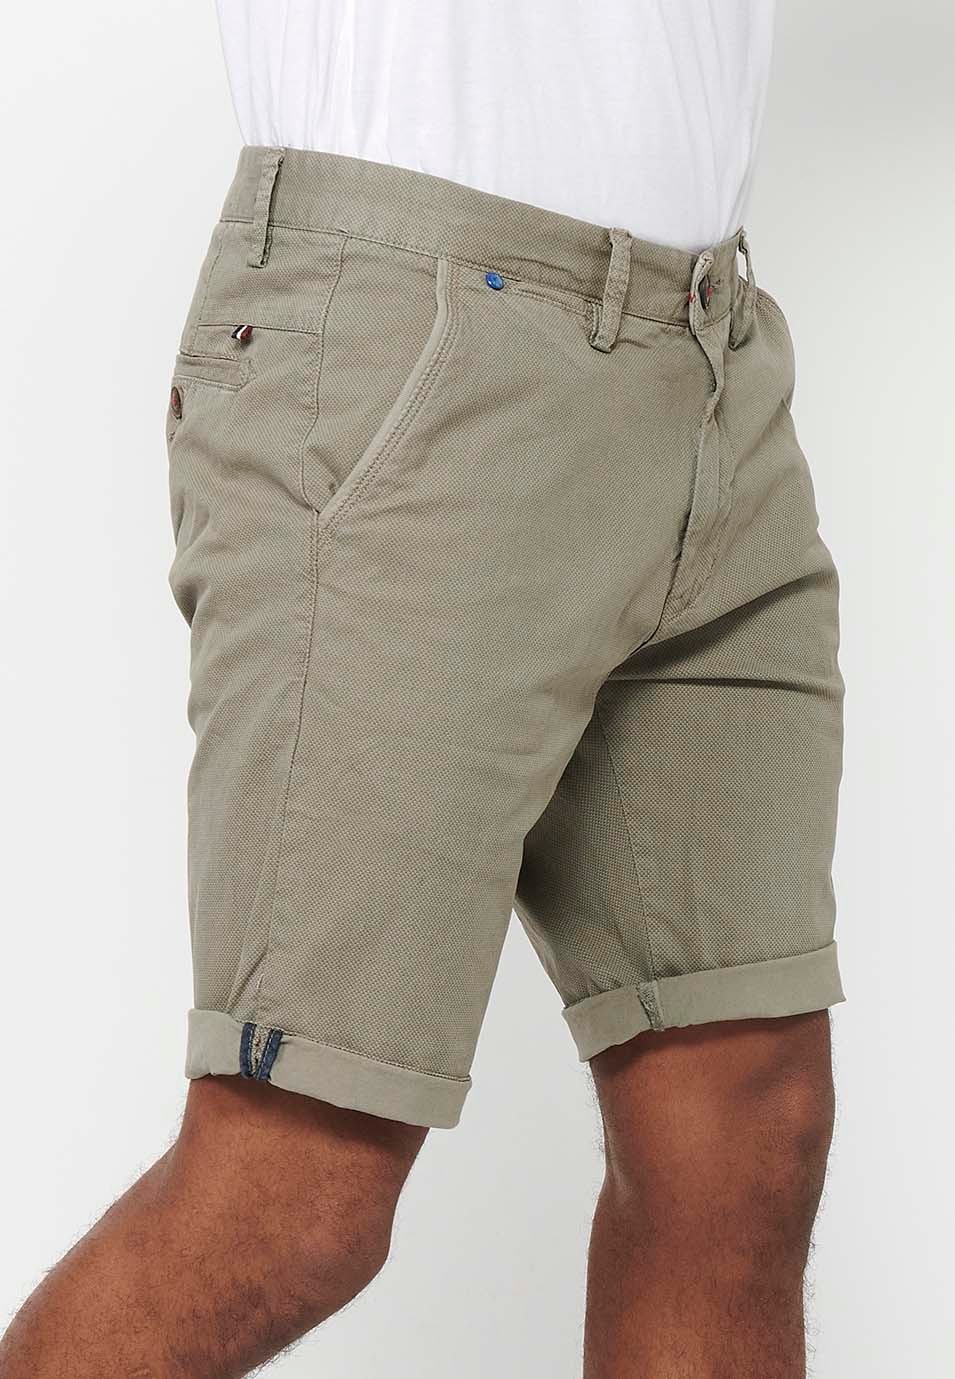 Men's Bermuda Chino Shorts with Turn-Up Finish with Front Zipper and Button Closure with Four Pockets in Mink Color 3